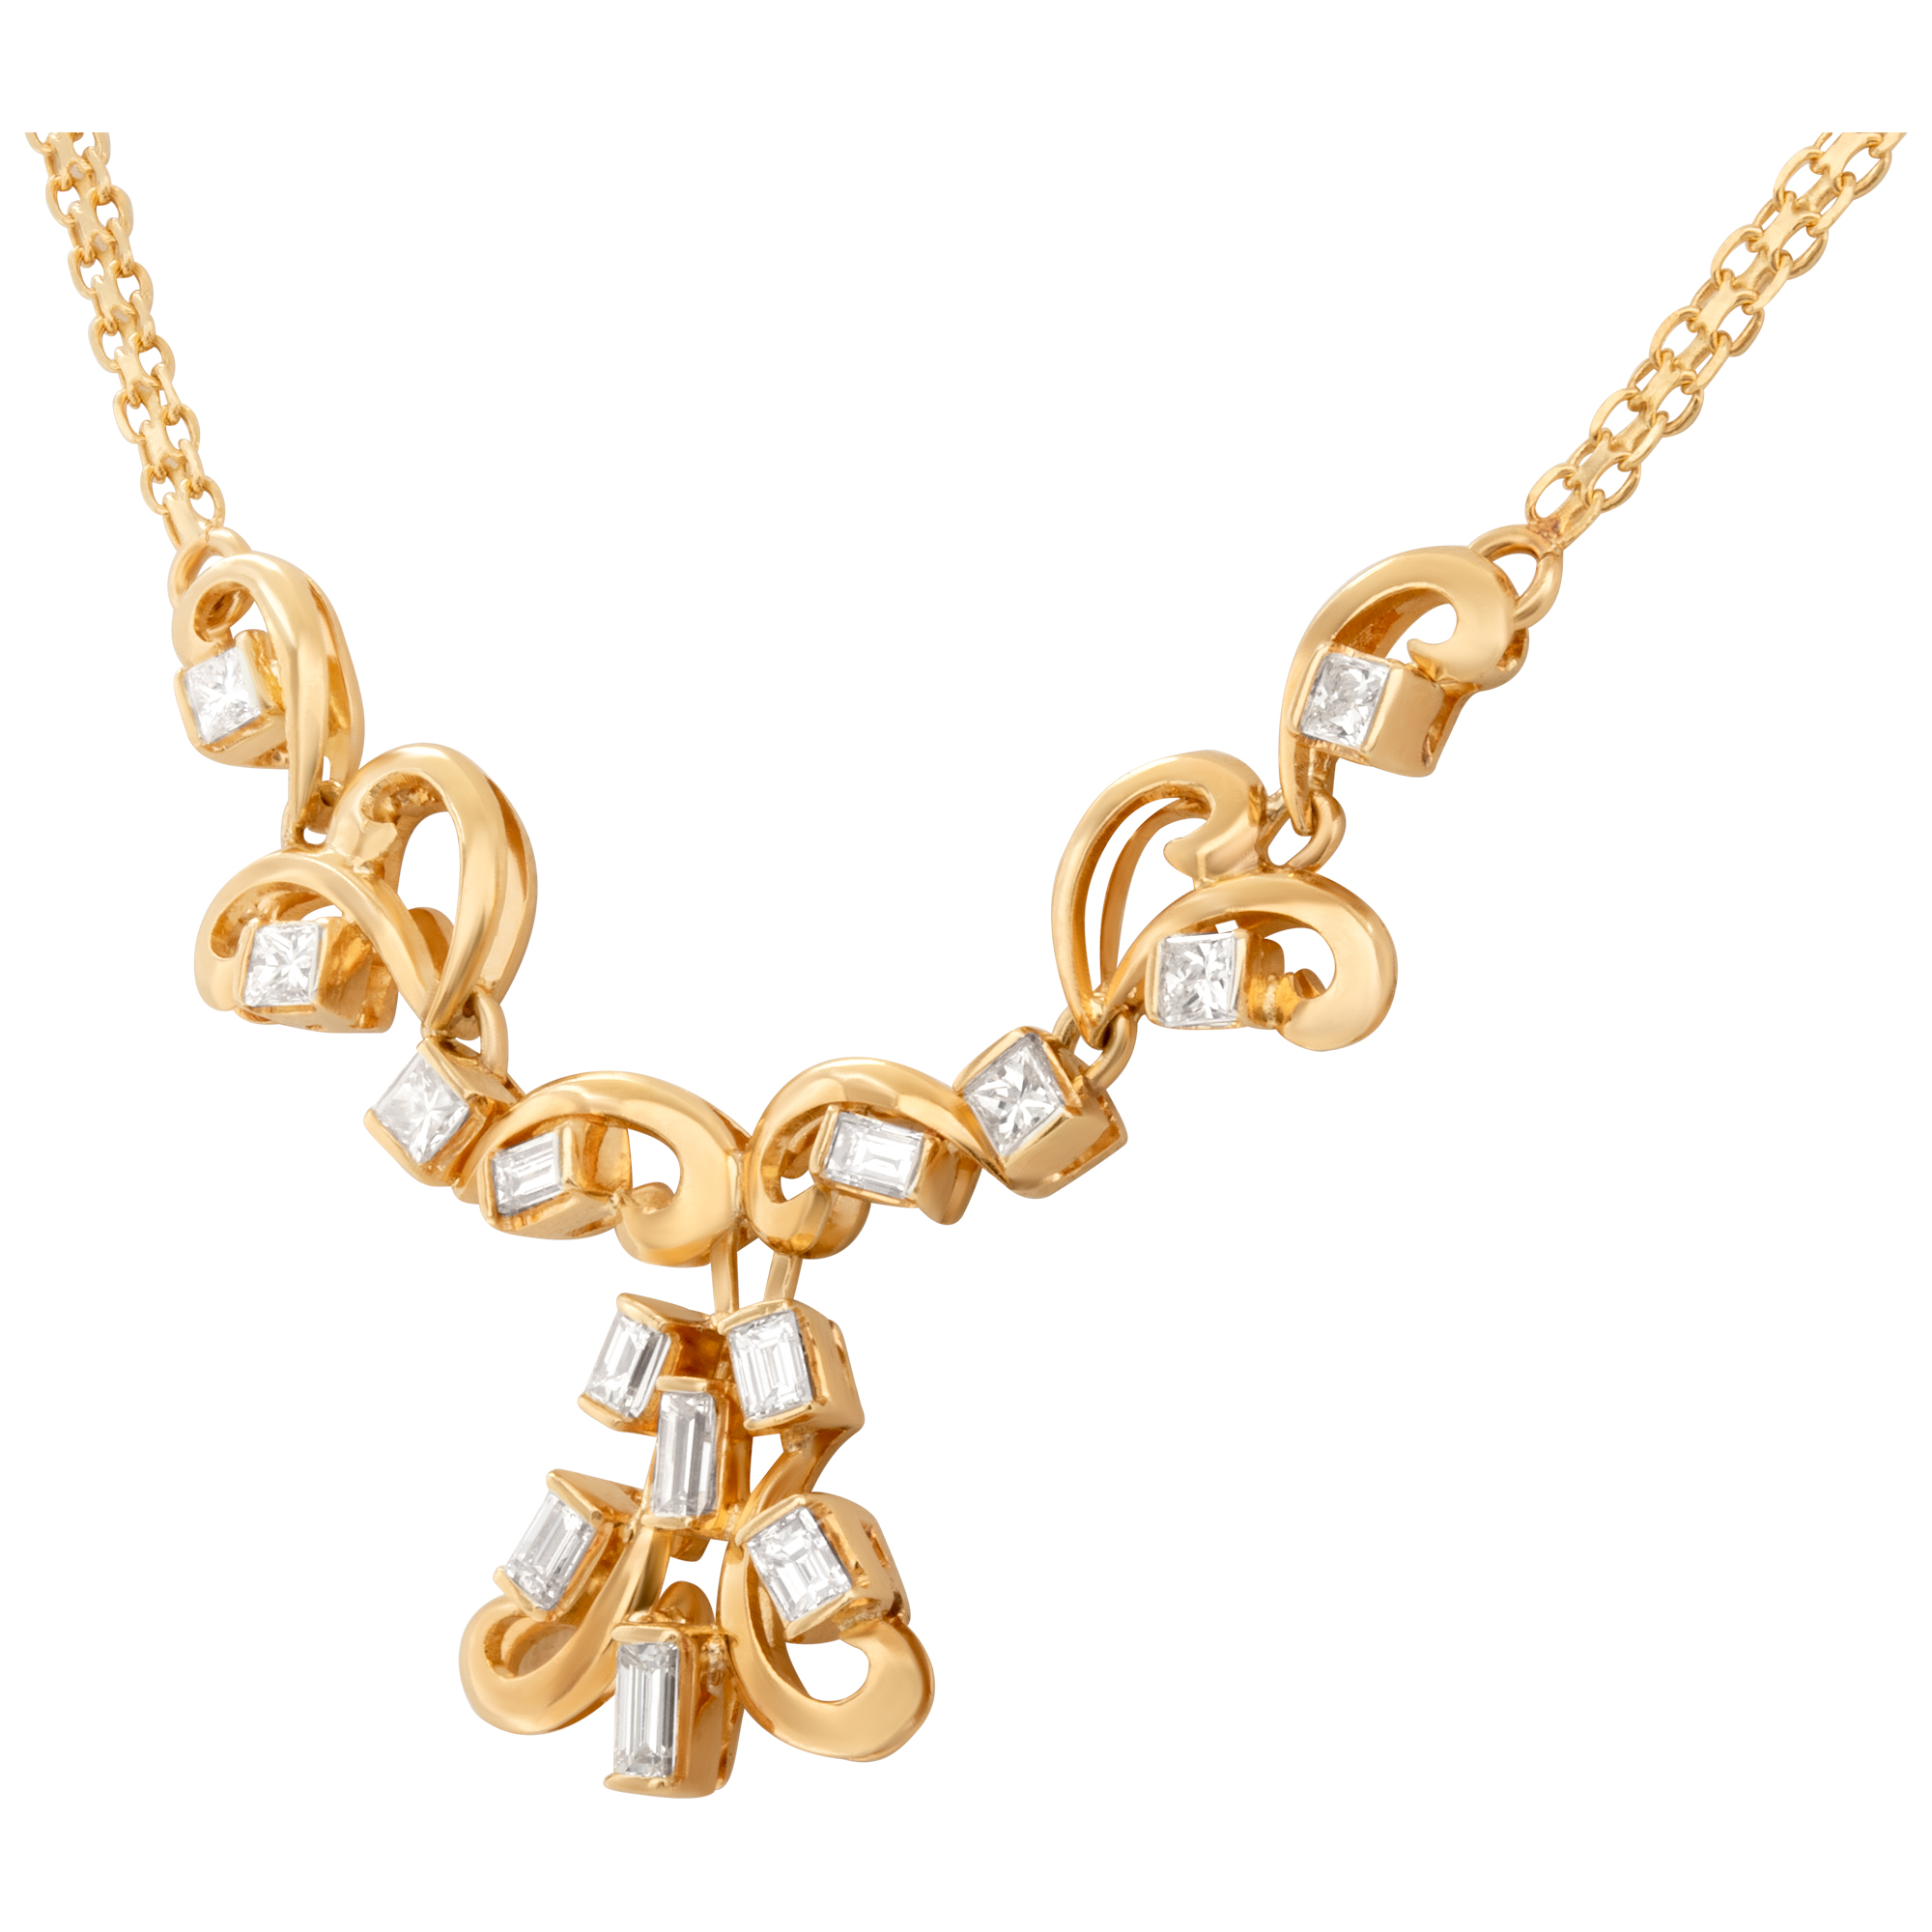 Swirl diamond necklace in 18k yellow gold with over 2 carats image 3